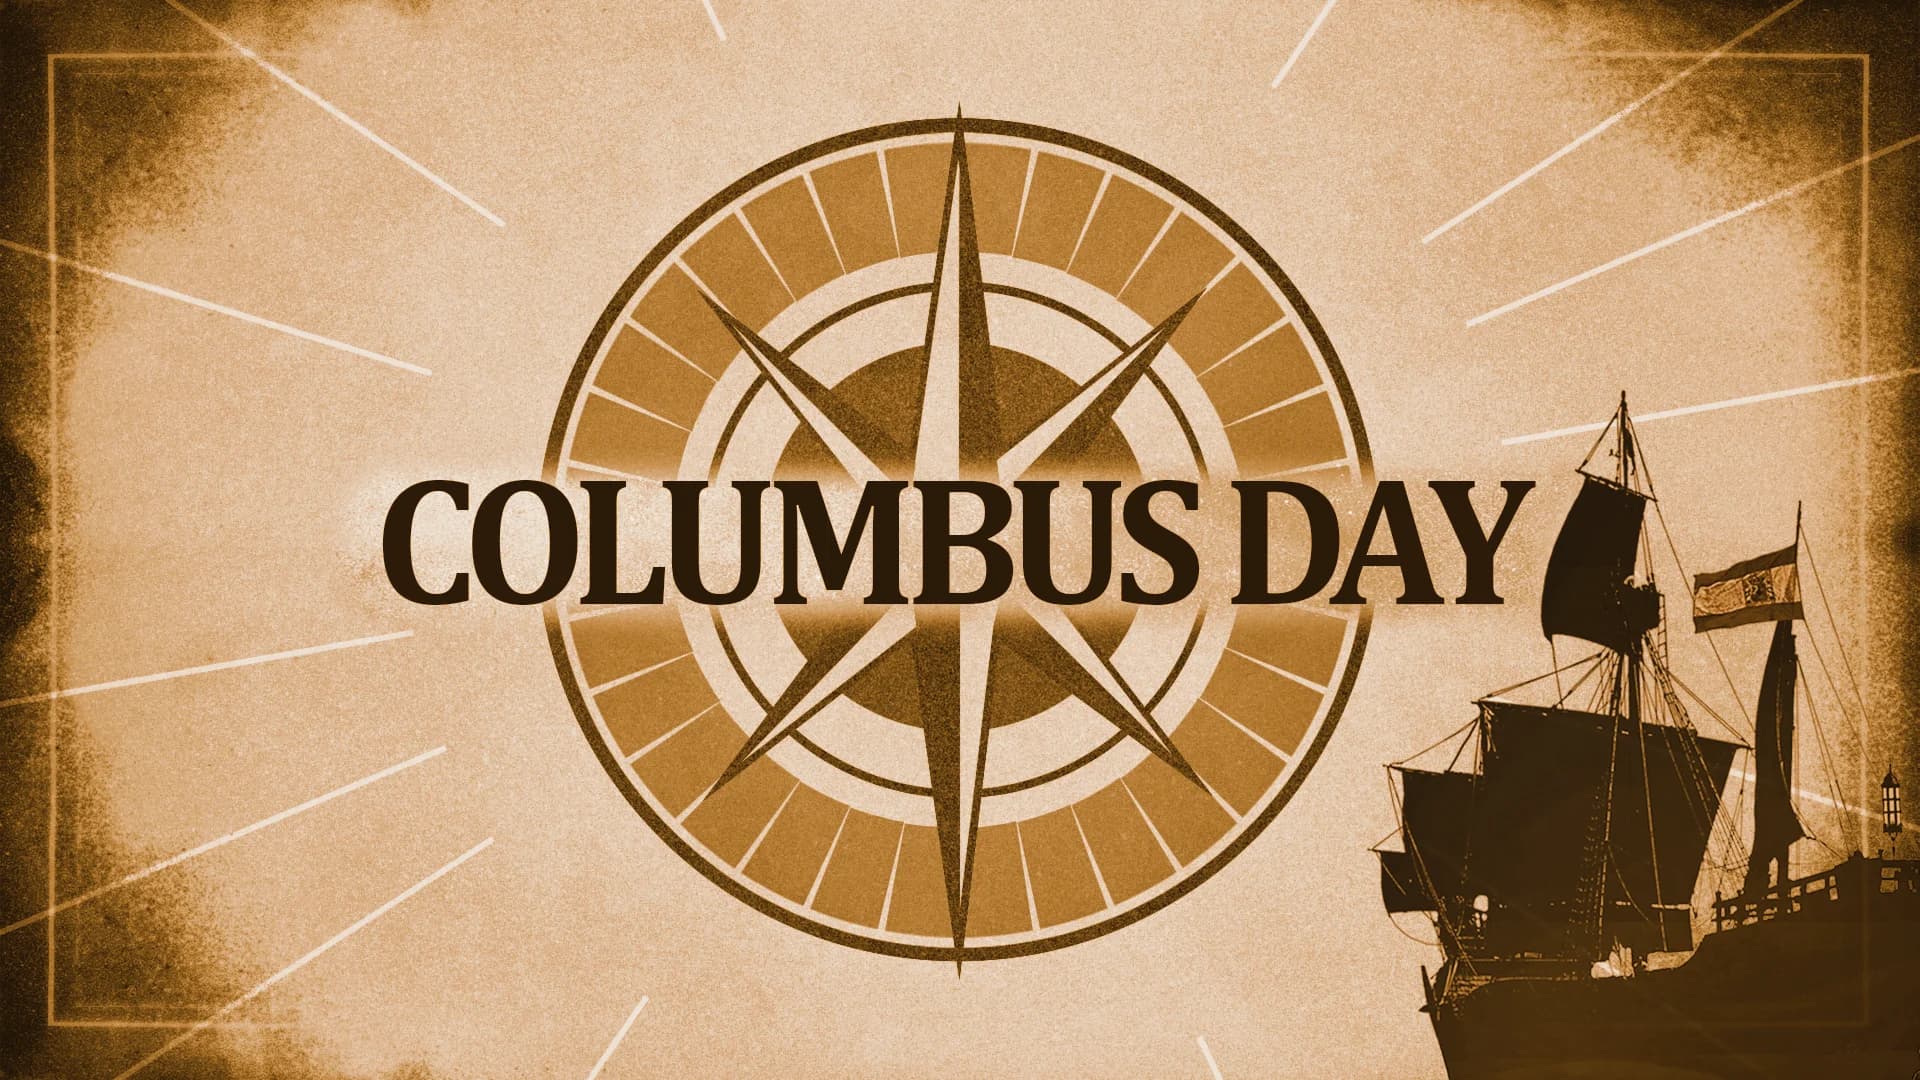 NYC schools try compromise on Columbus Day, displeasing some